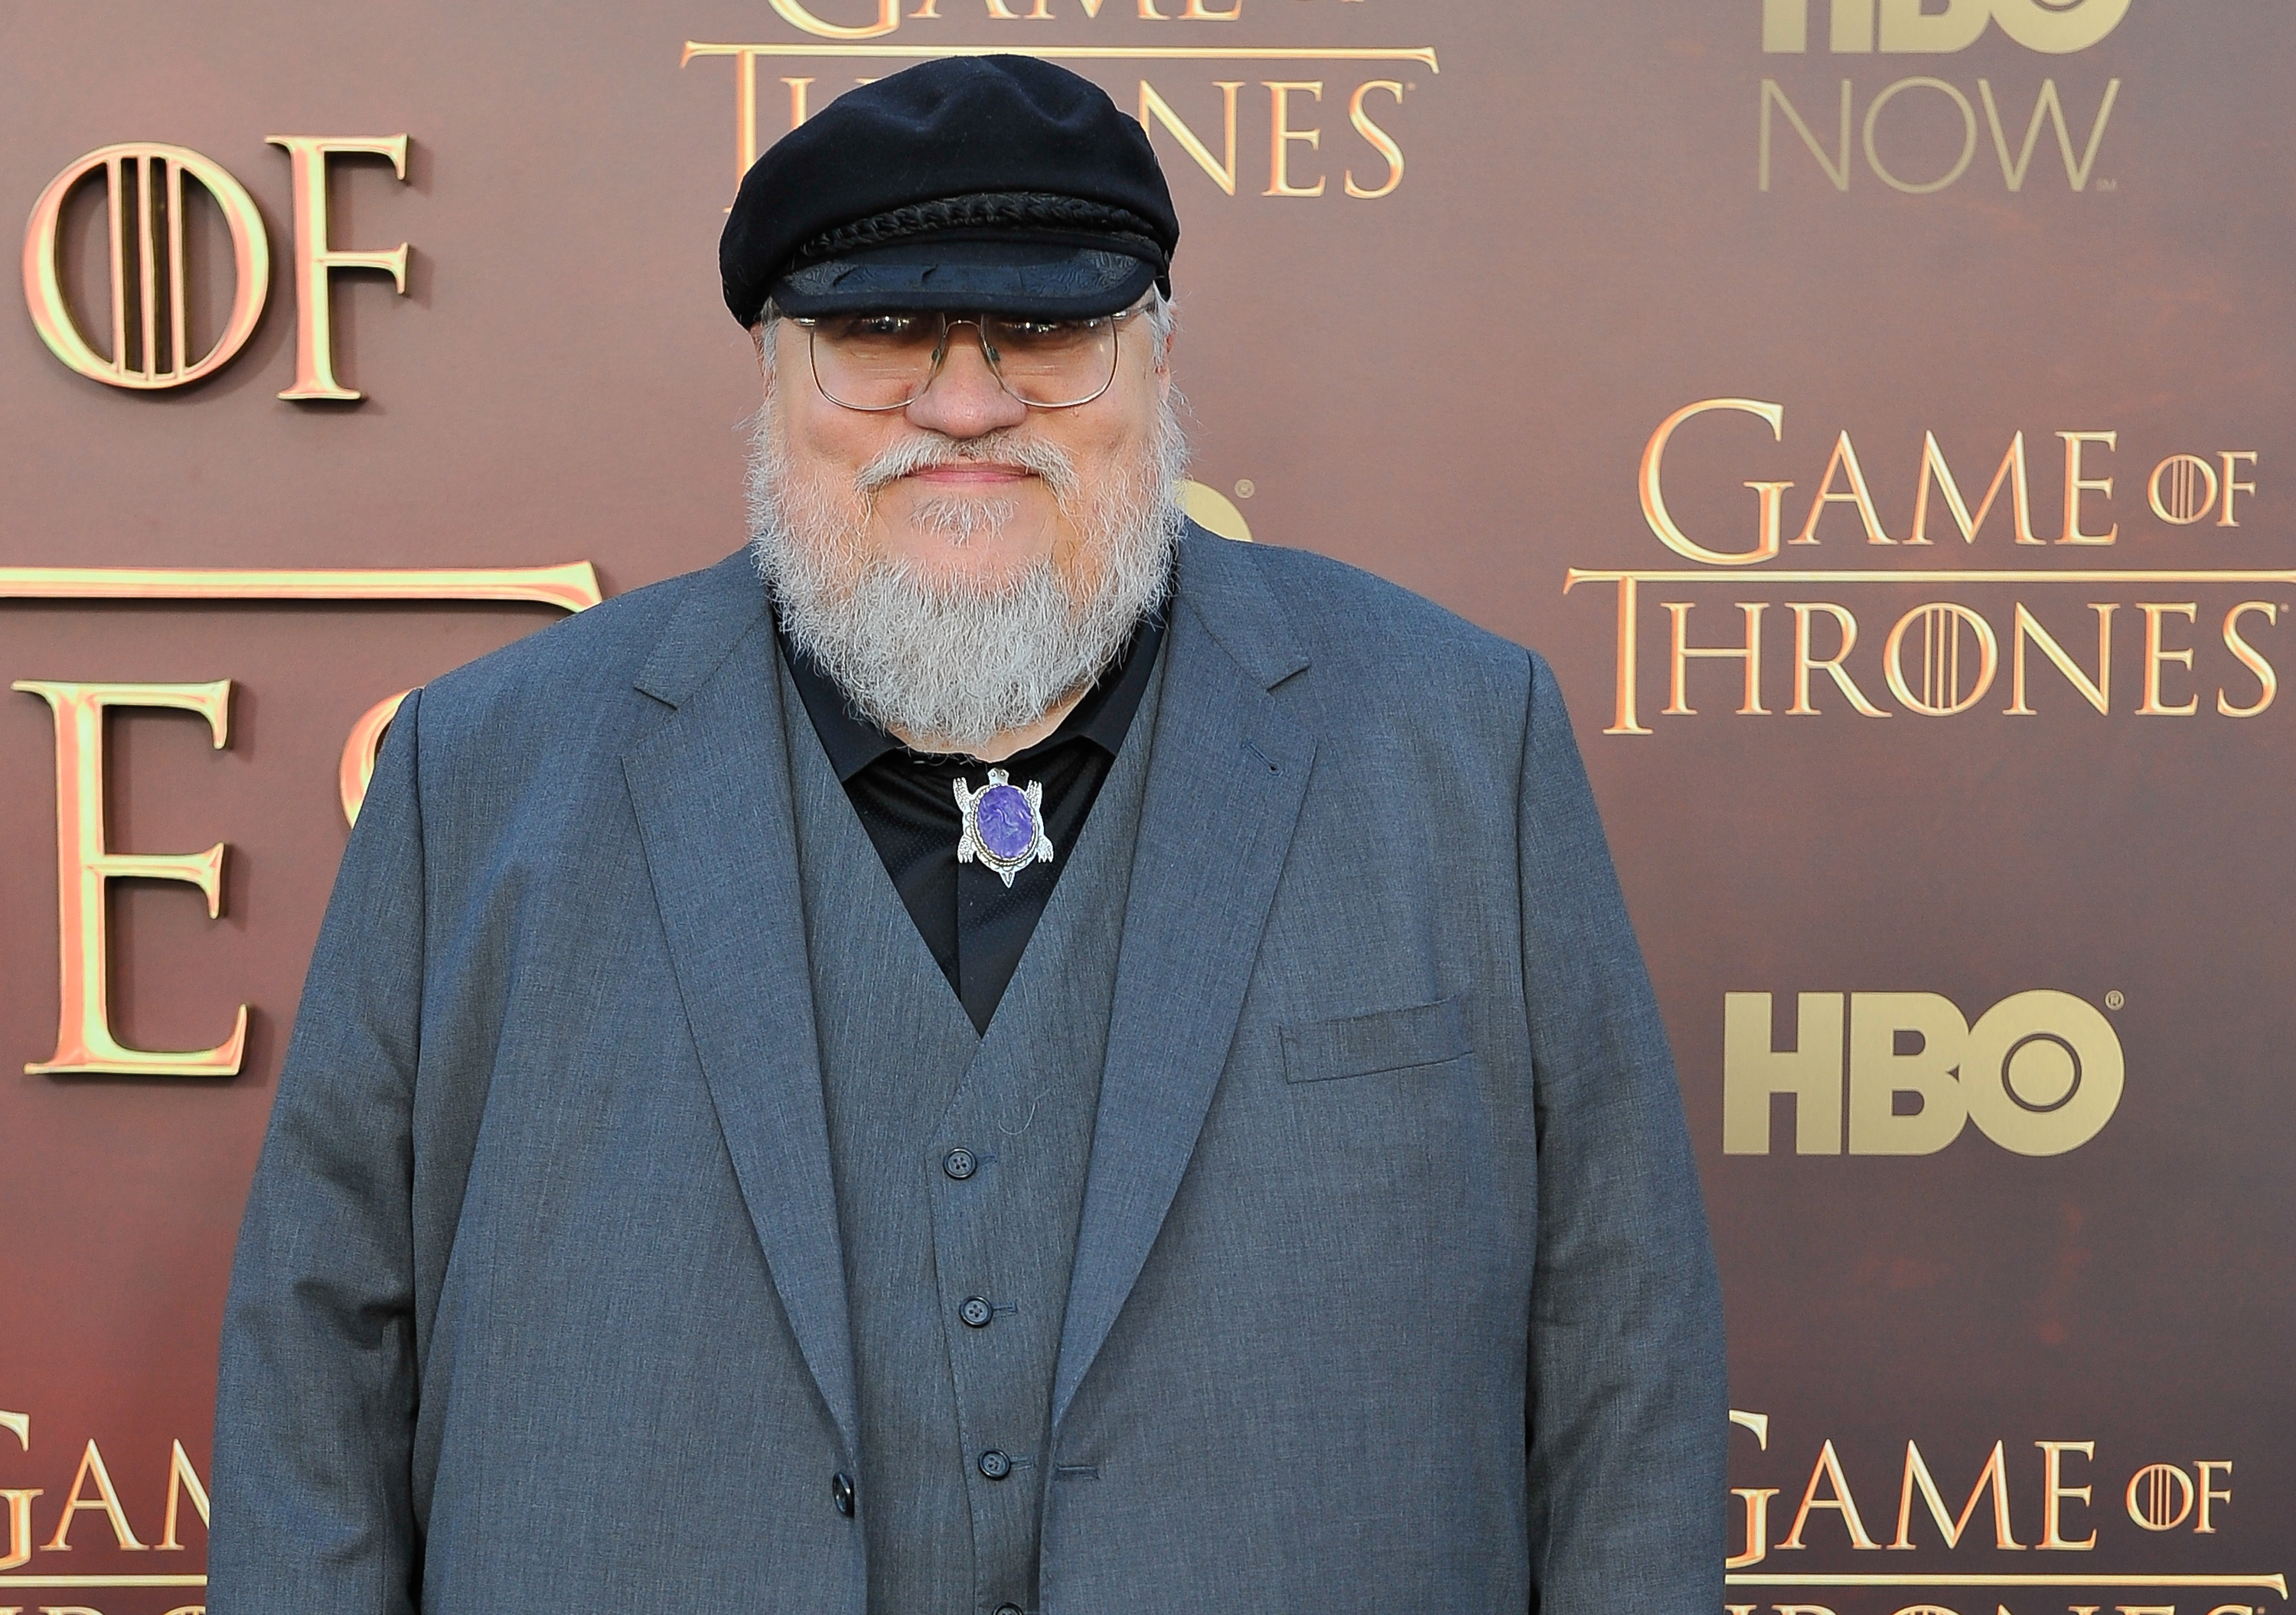 George R.R. Martin Writer/Co-Executive Producer attends HBO's "Game Of Thrones" Season 5 San Francisco Premiere (Steve Jennings&mdash;WireImage)